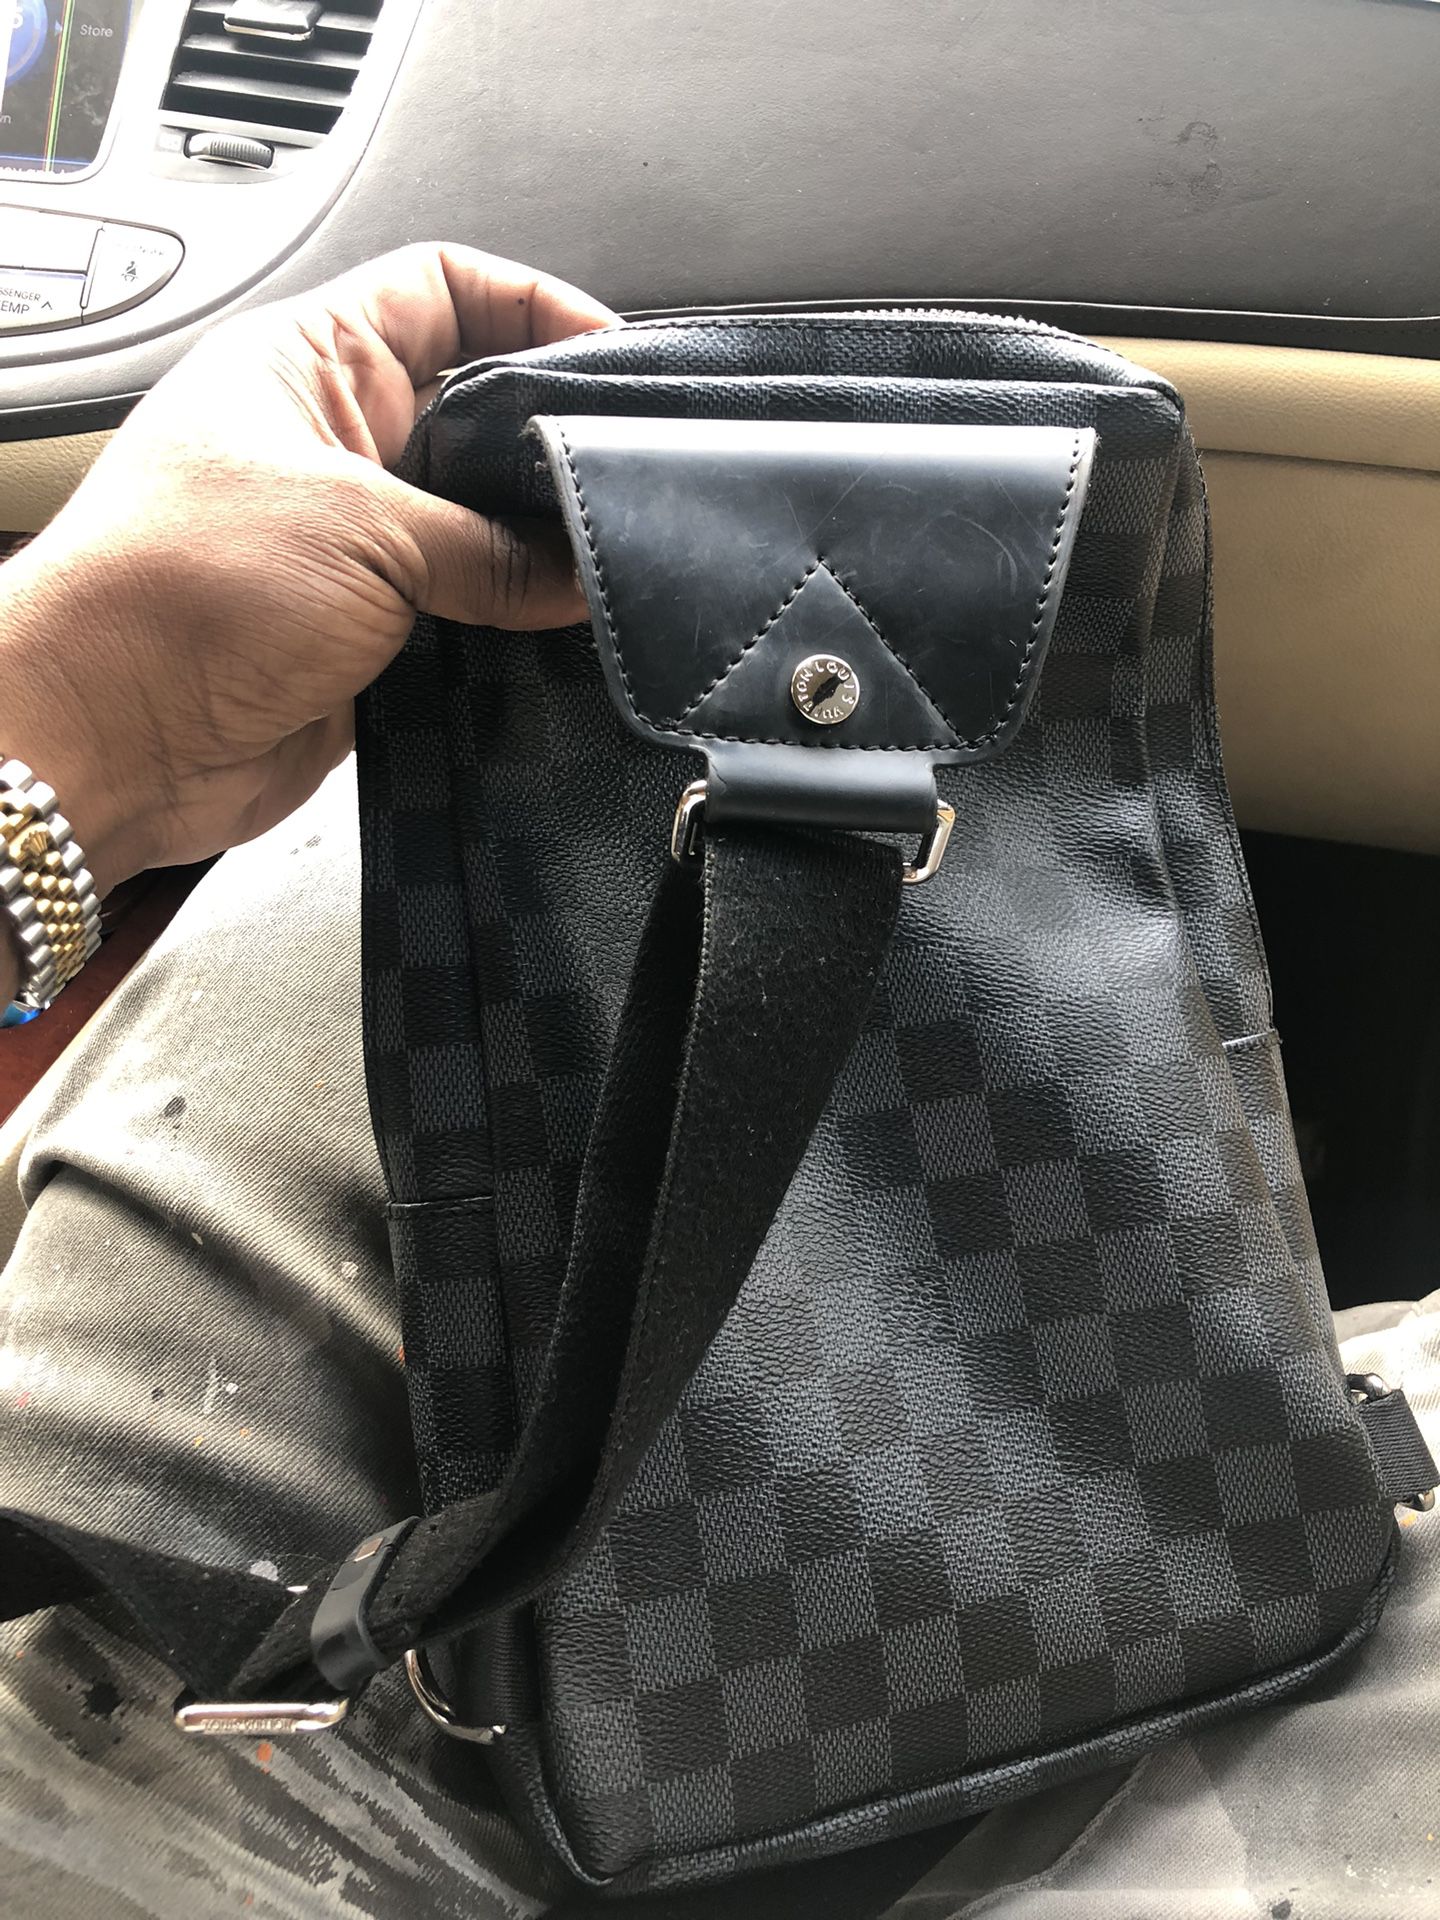 Louis Vuitton Boxes And Bag for Sale in Oakland, FL - OfferUp